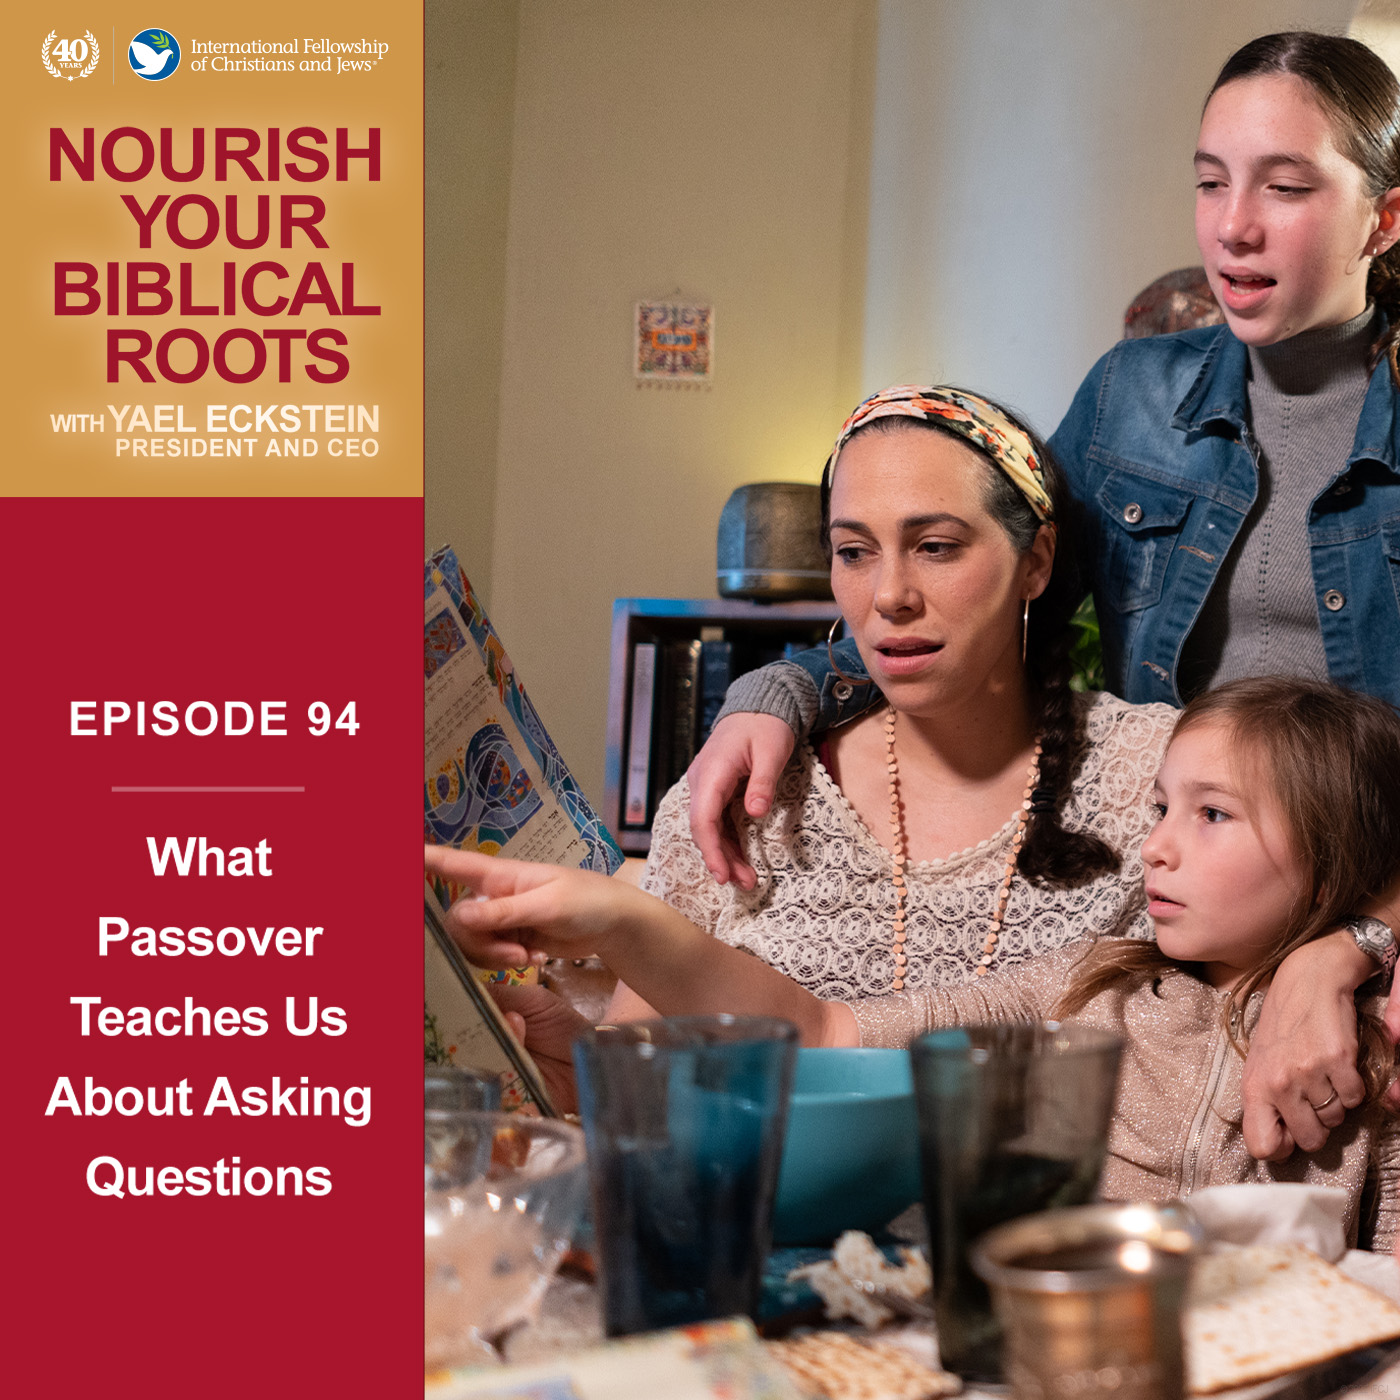 What Passover Teaches Us About Asking Questions